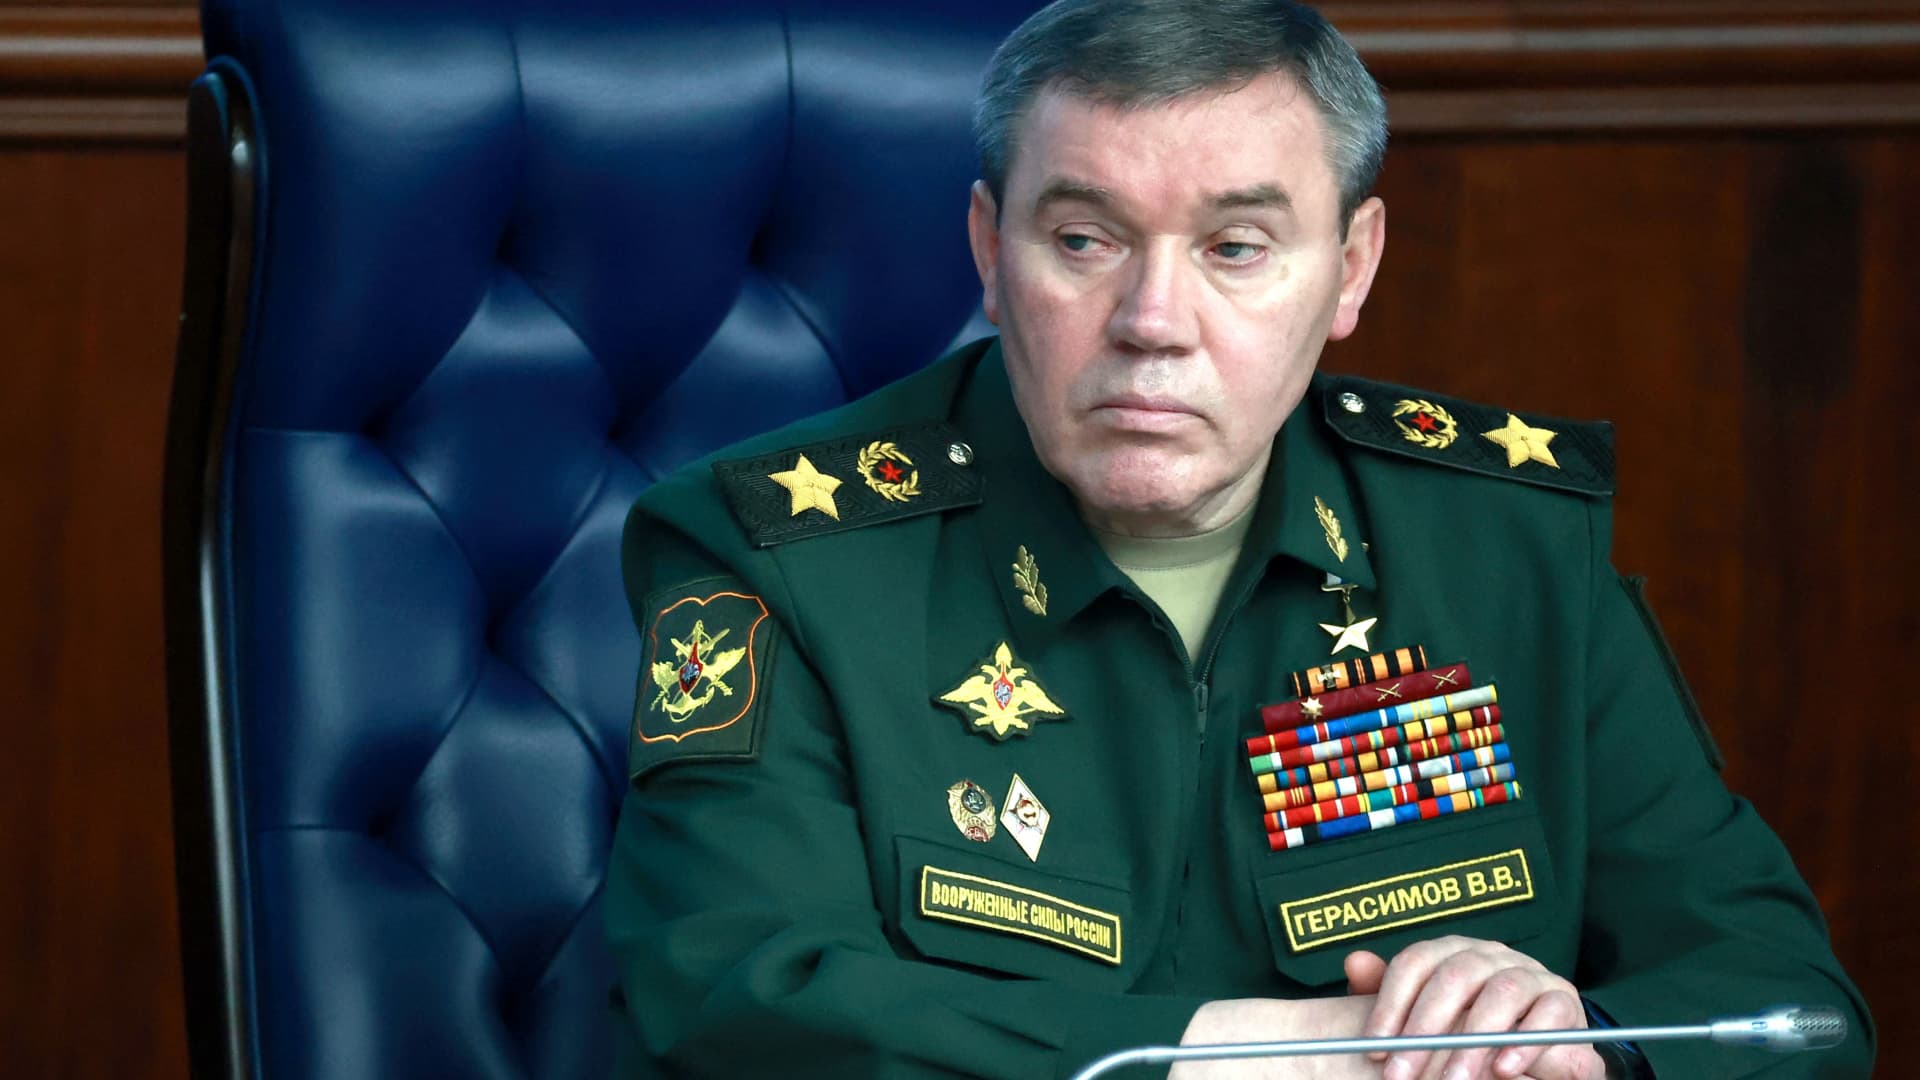 Valery Gerasimov attends a military meeting in Moscow in December 2022, when he was chief of the General Staff. Gerasimov will take direct control of the ongoing invasion of Ukraine.